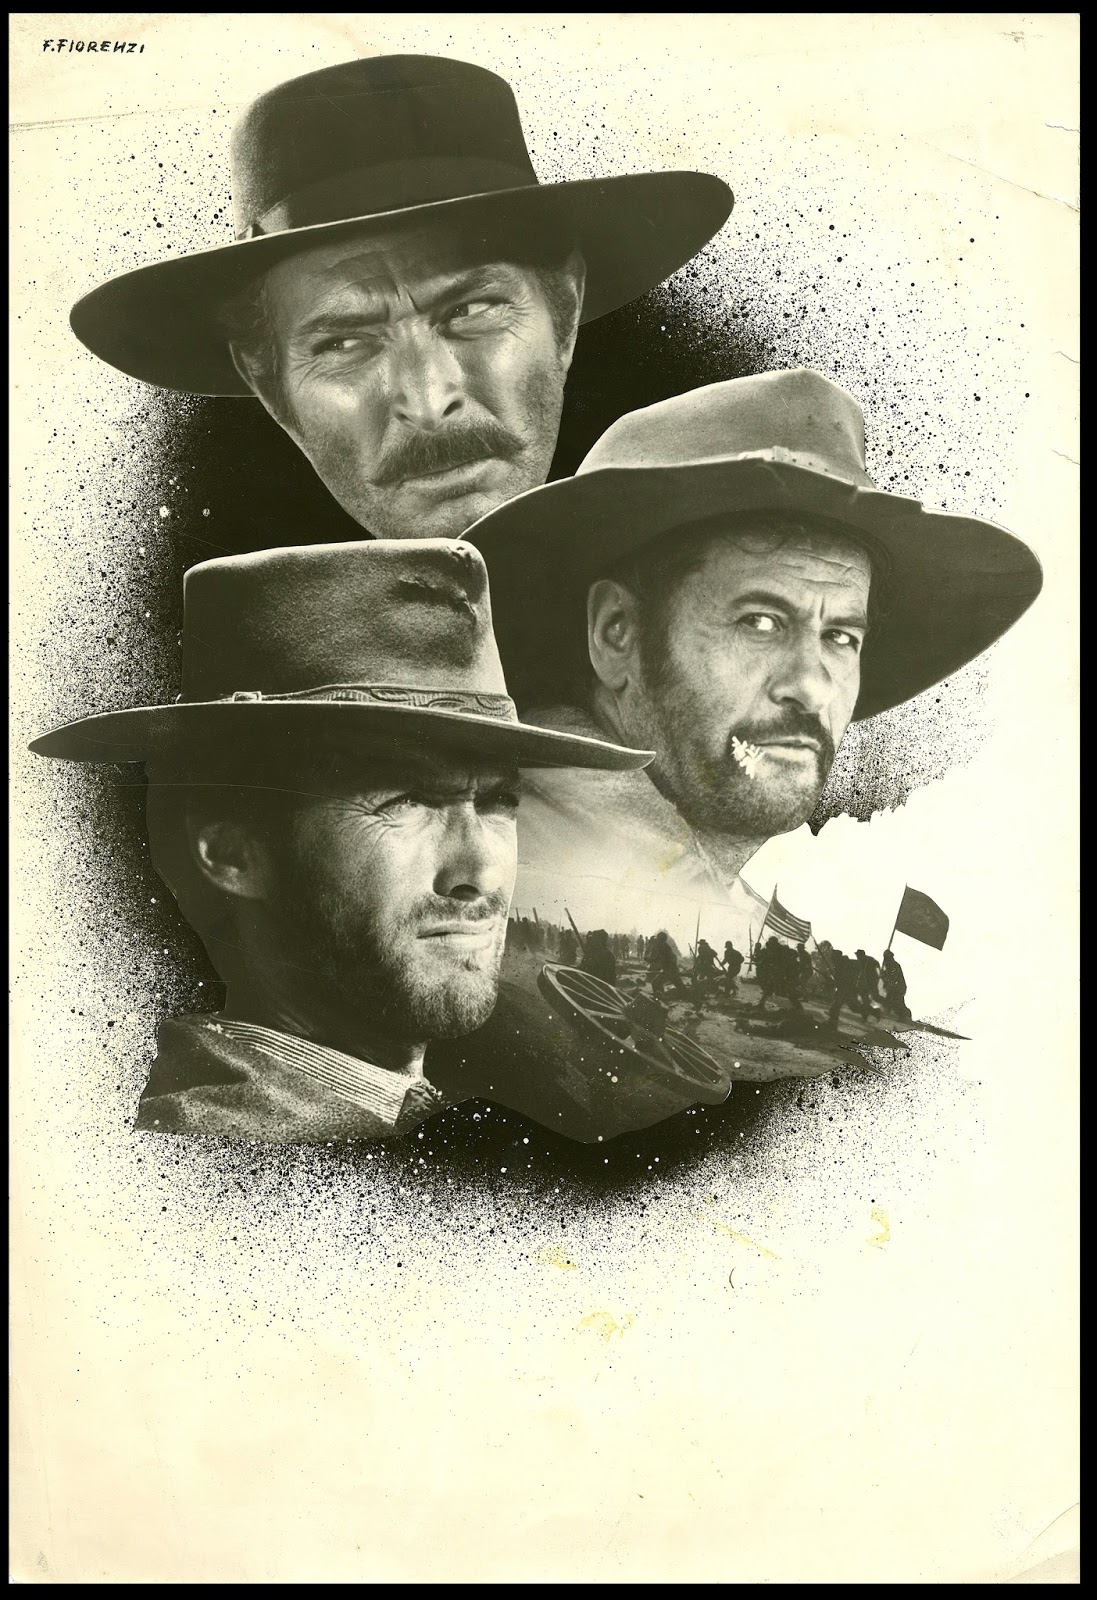 The Clint Eastwood Archive: The Good, the Bad and the Ugly 1966